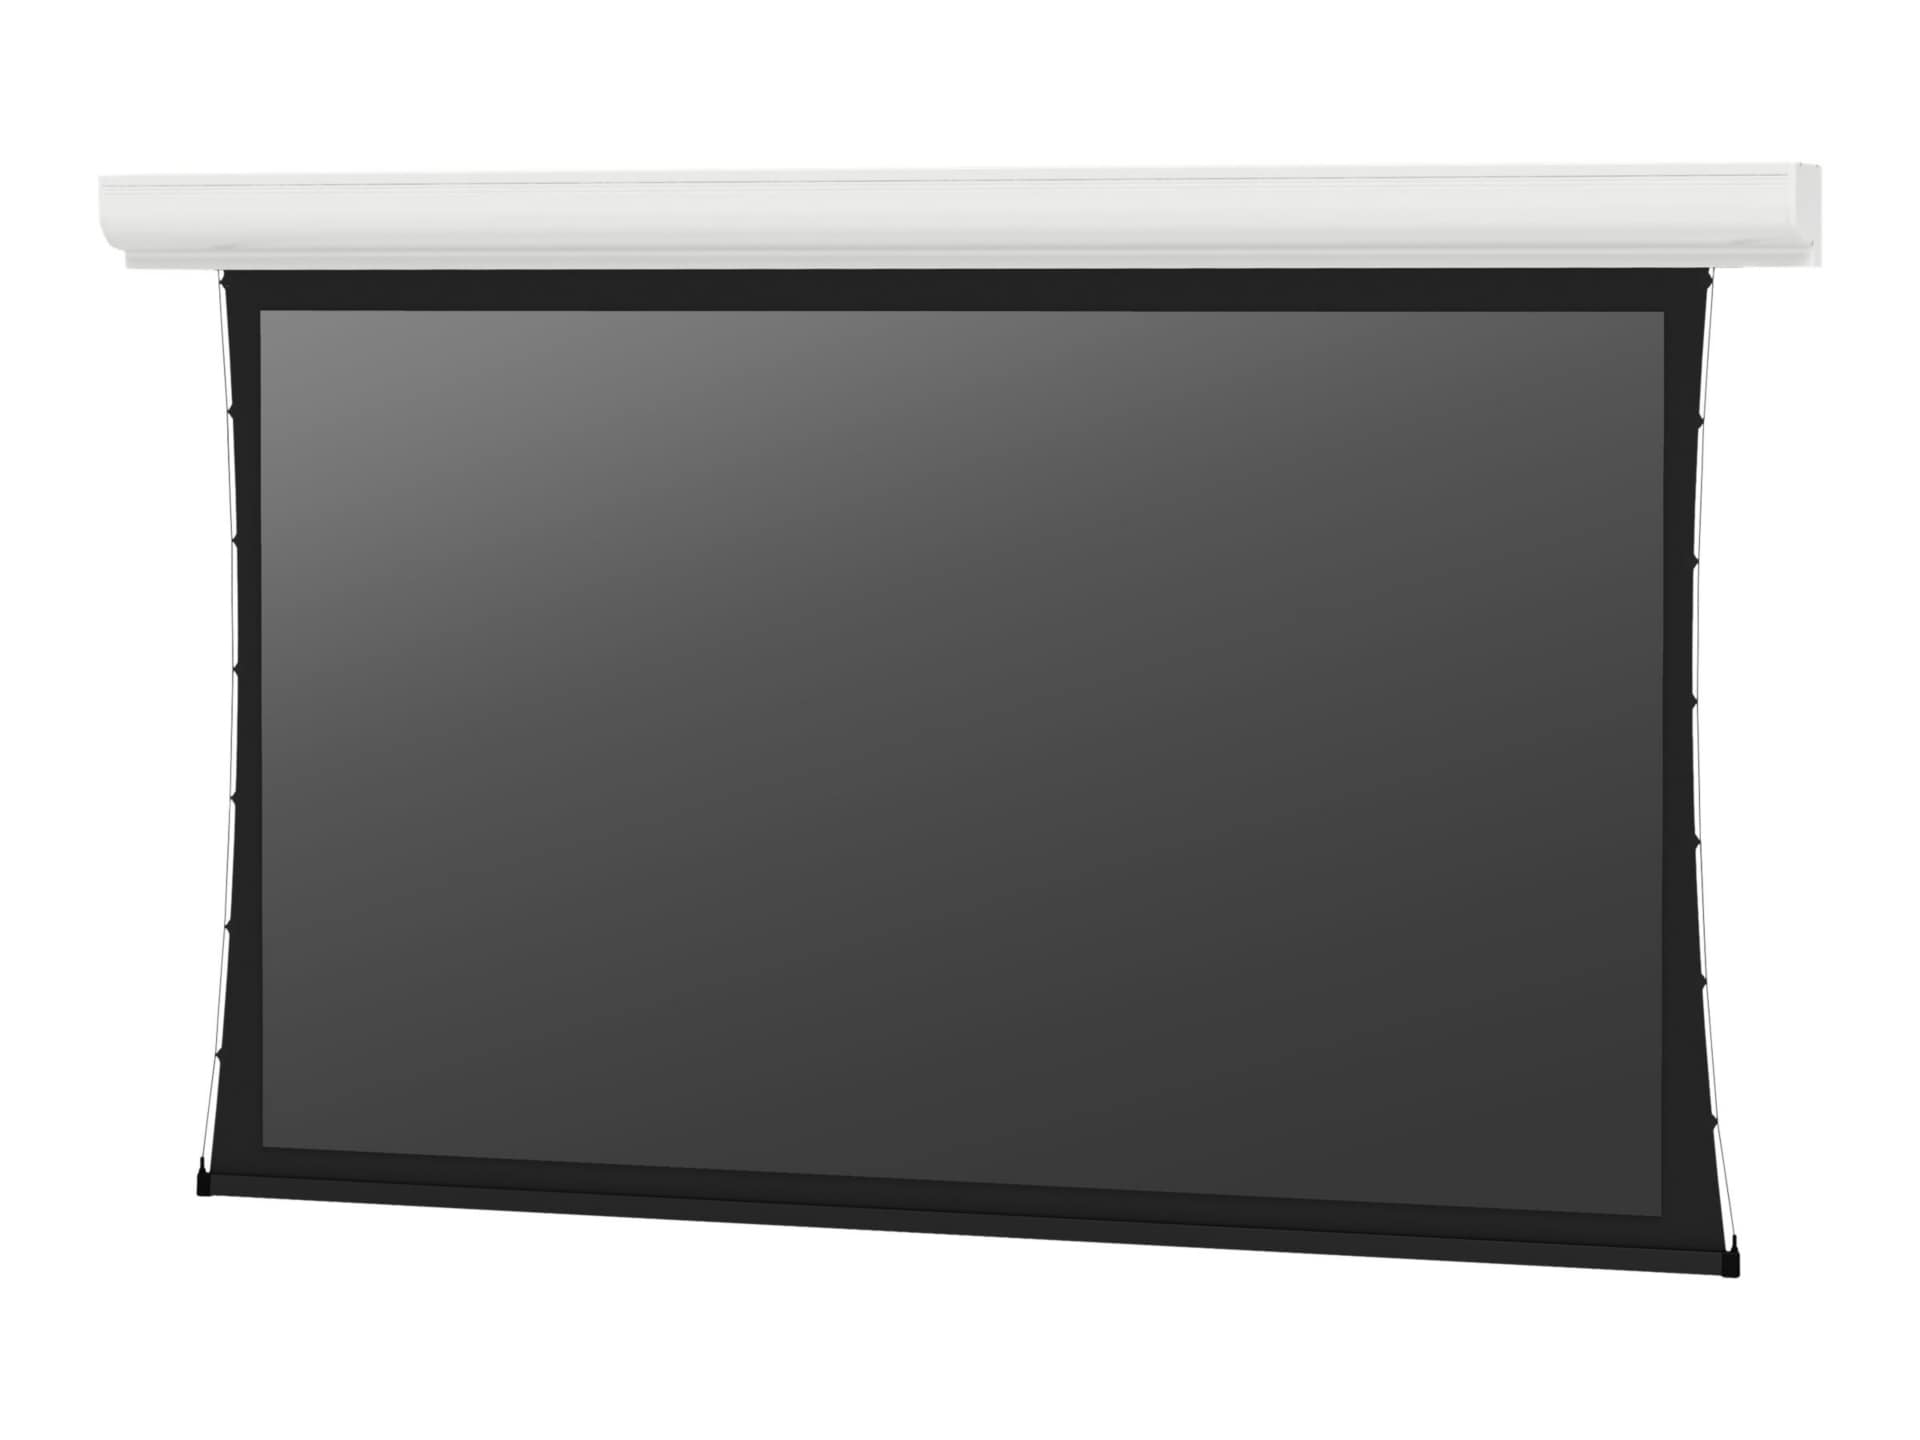 Da-Lite Tensioned Contour Electrol Series Projection Screen - Wall or Ceiling Mounted Electric Screen - 137" Screen -